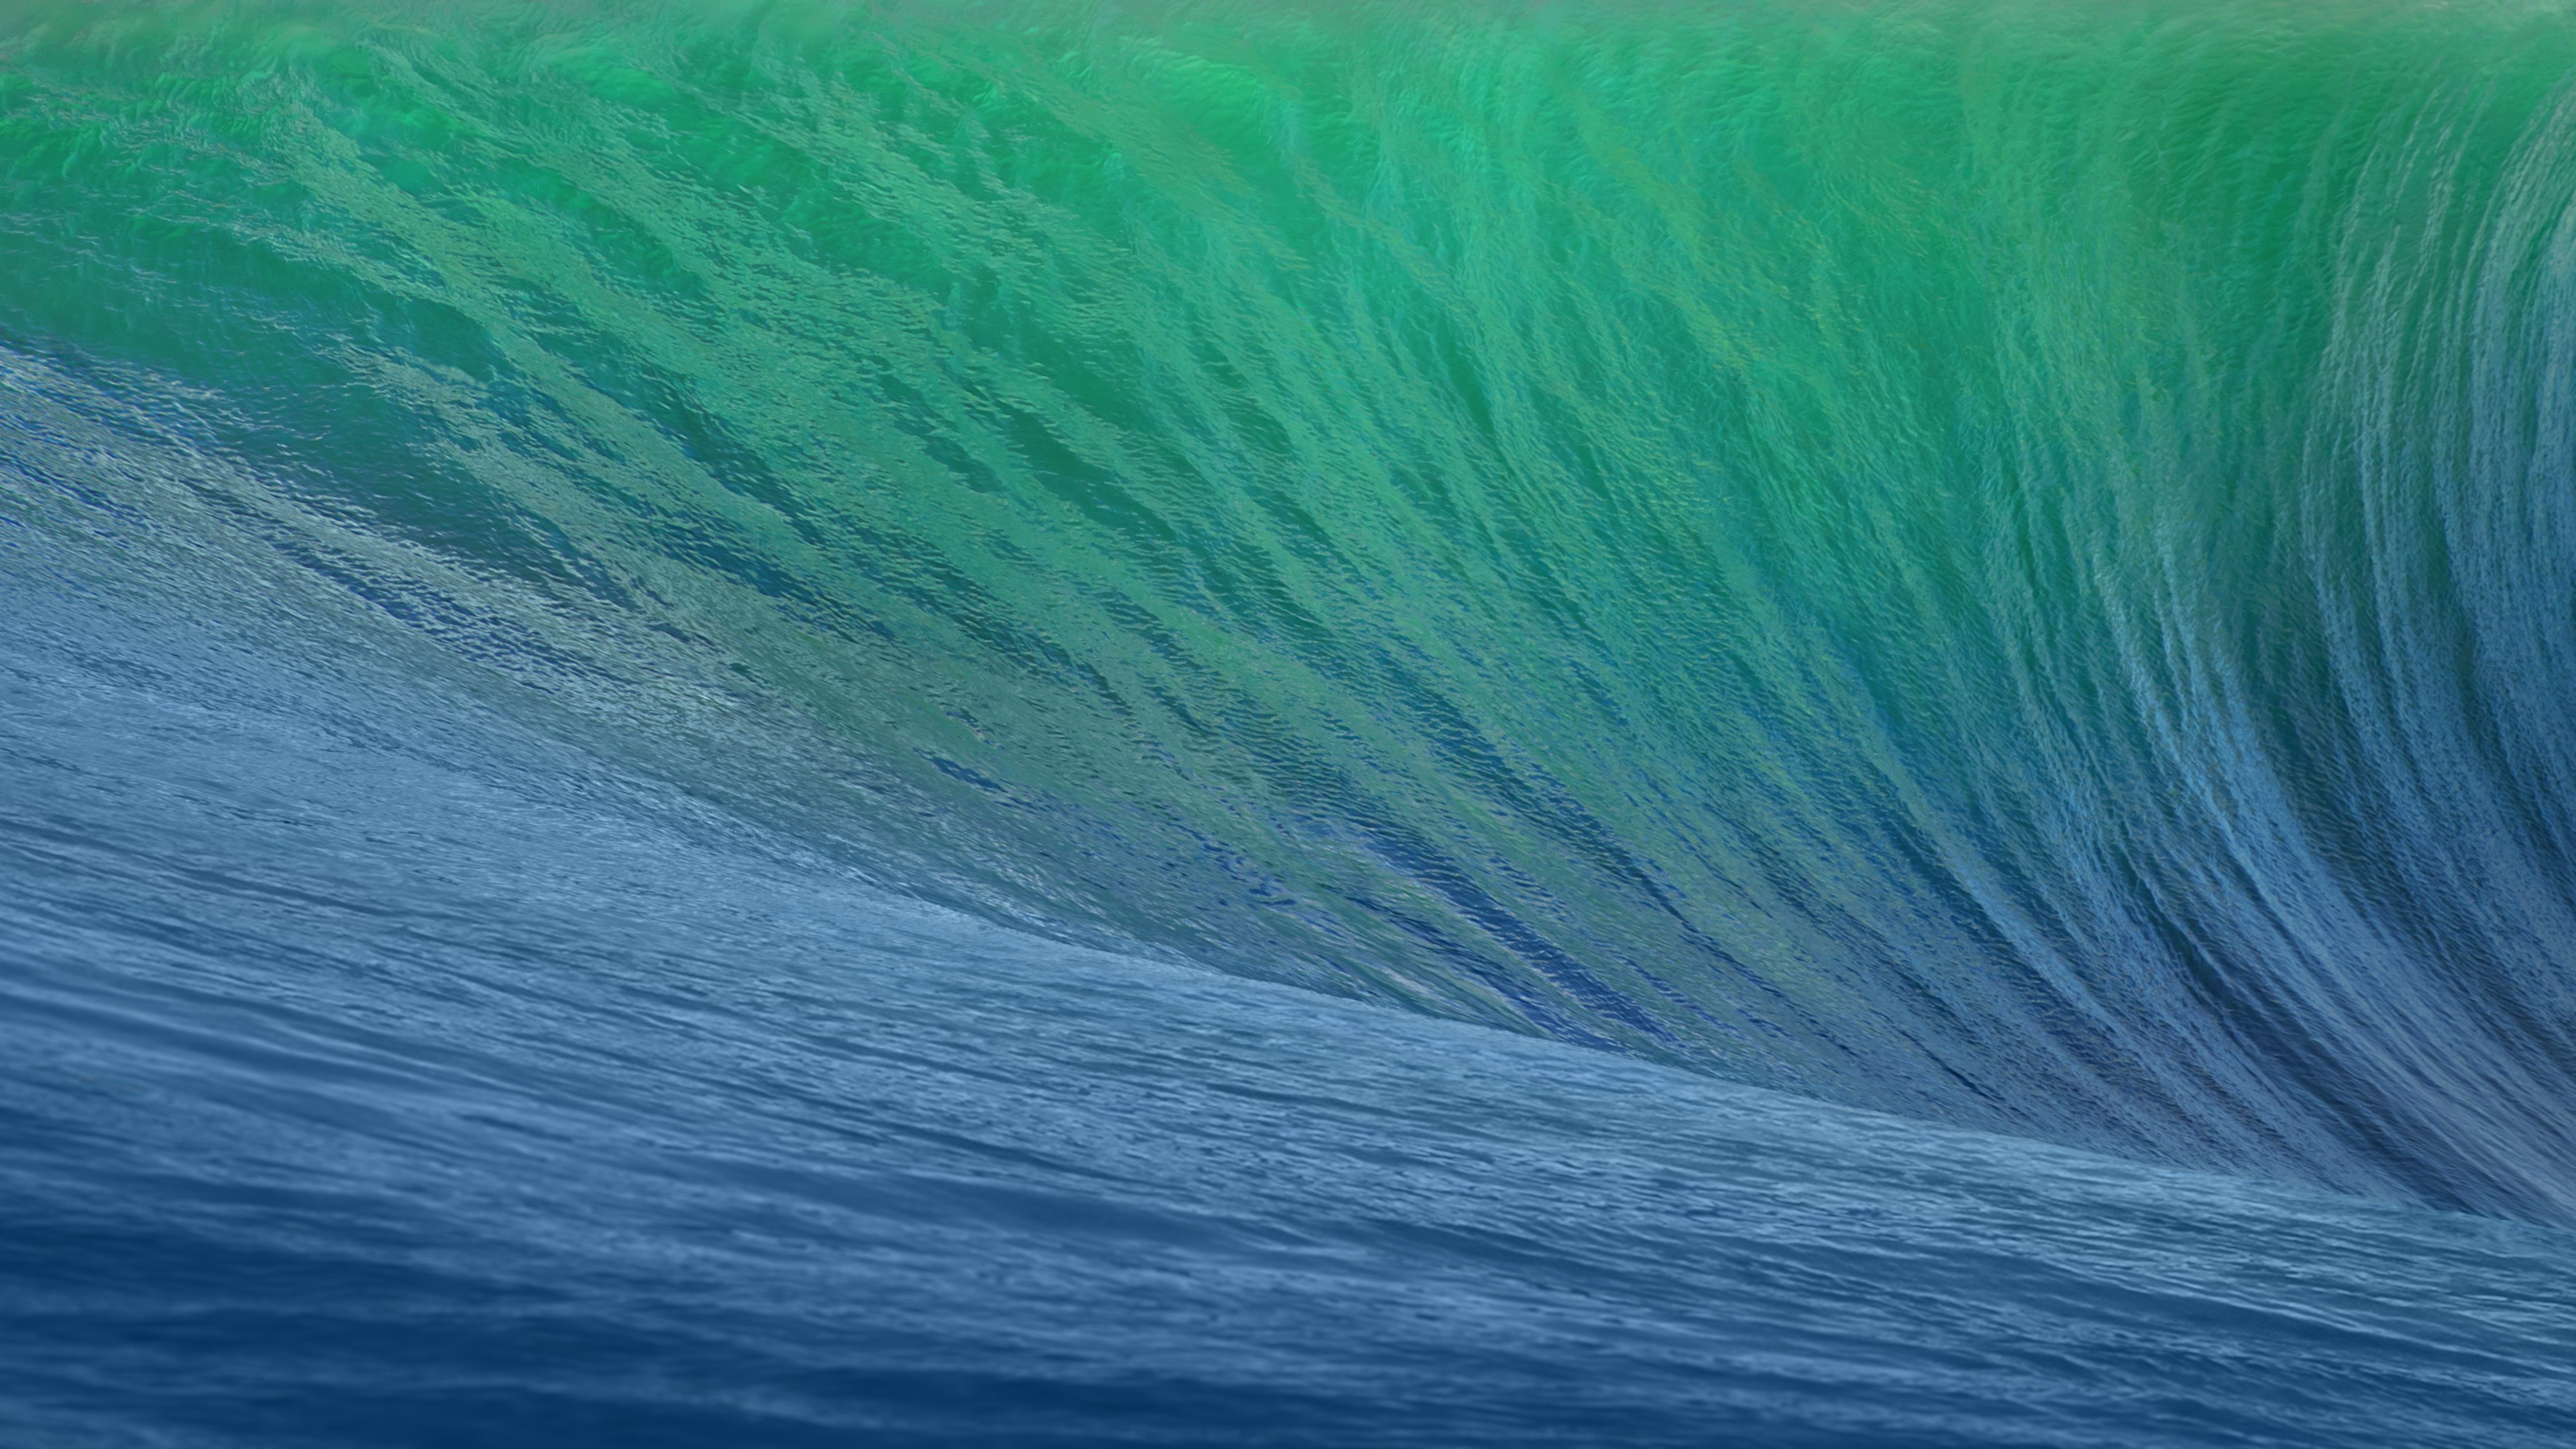 Apple Adds 8 Beautiful New Wallpapers to OS X Mavericks Download Now